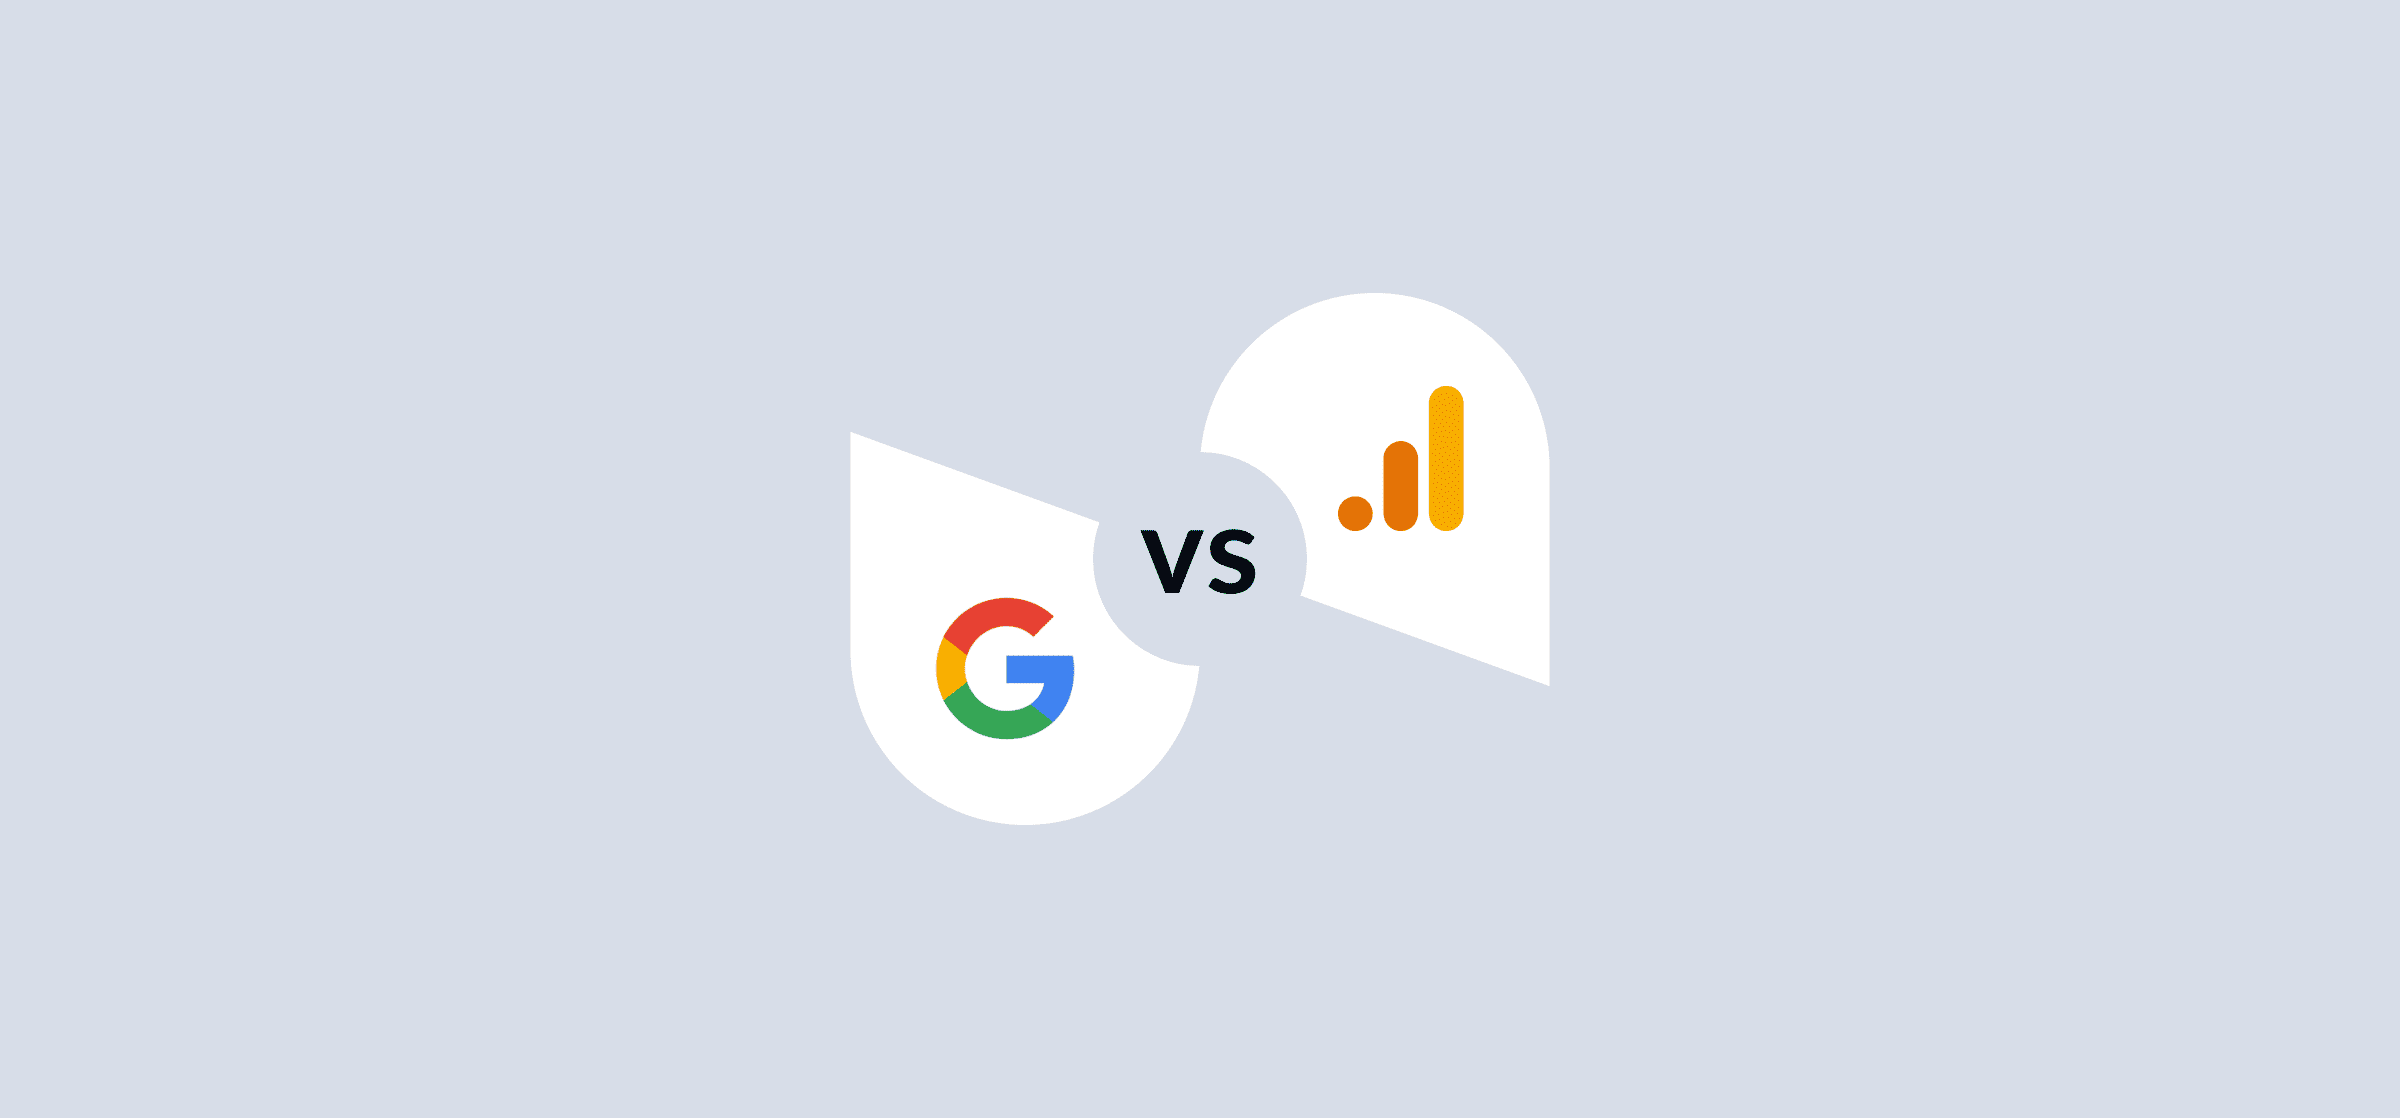 Logos for Google Analytics and Google Search Console, representing a blog post comparing both tools.